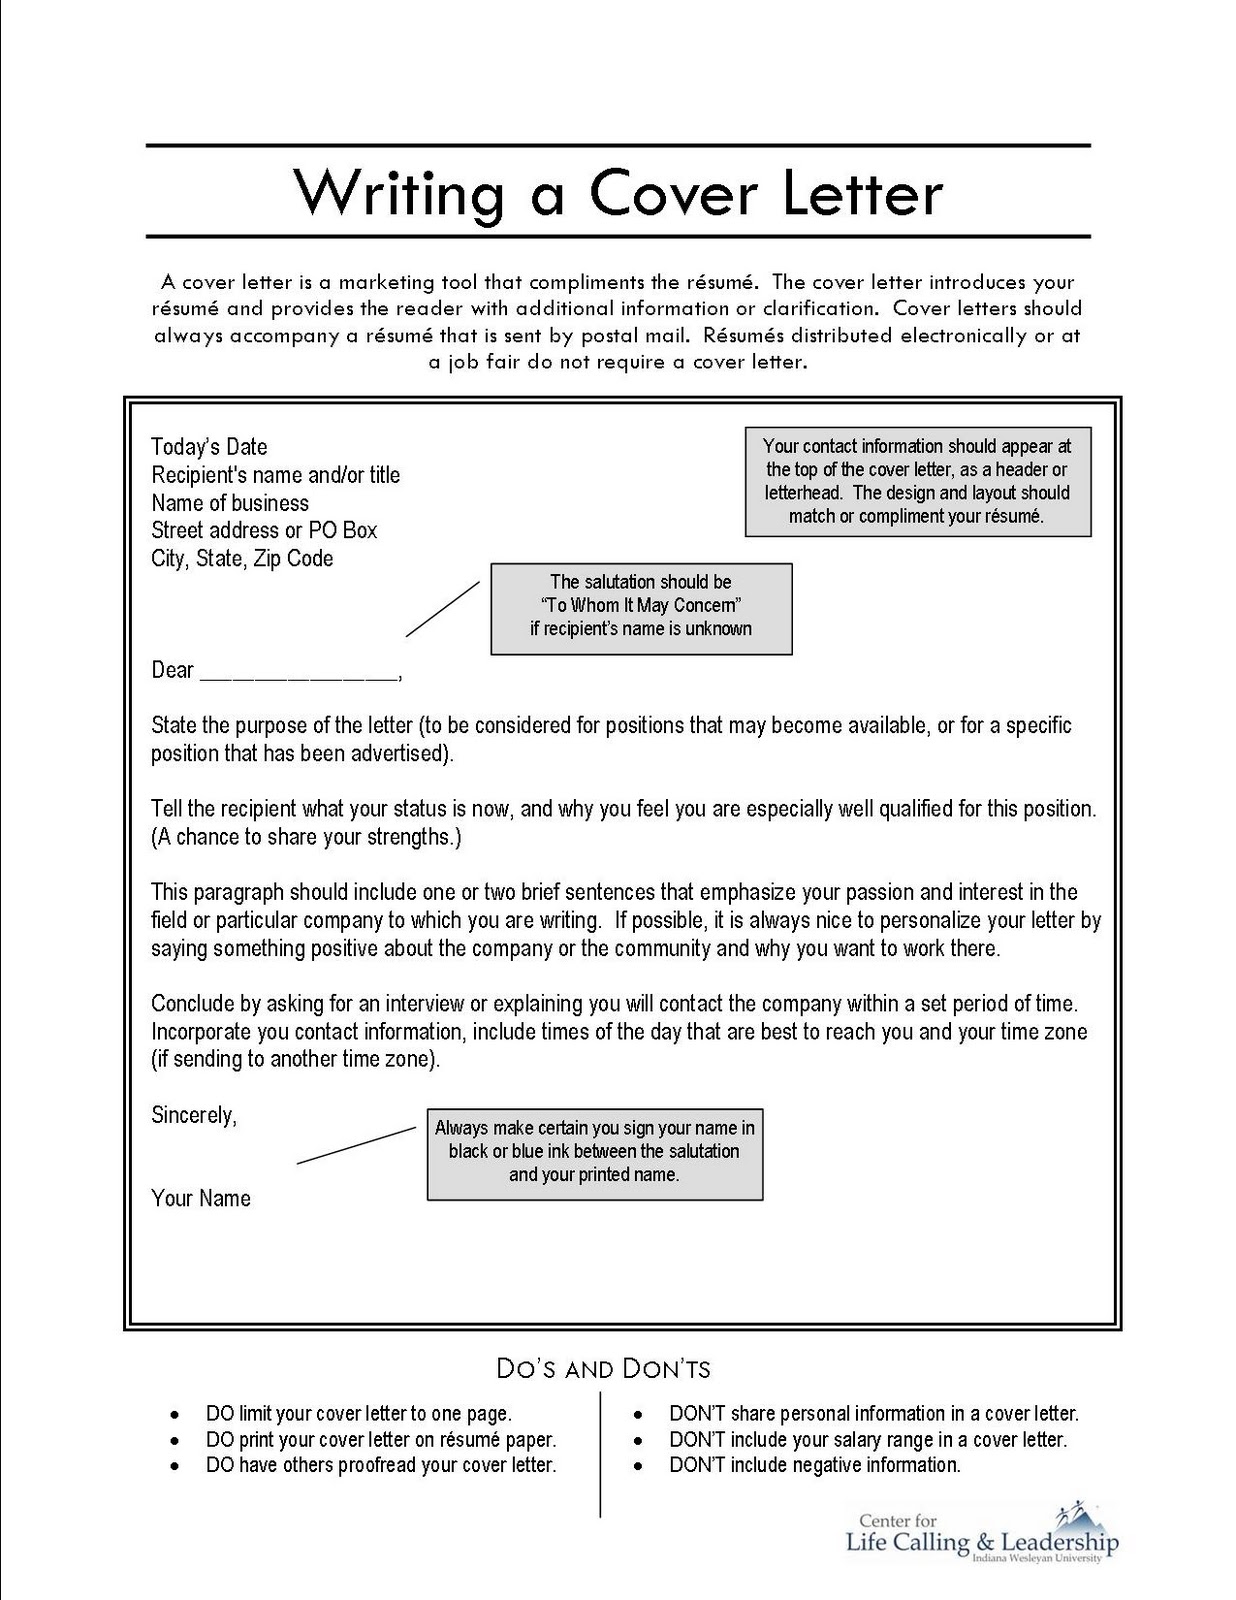 How to write a cover letter and resume